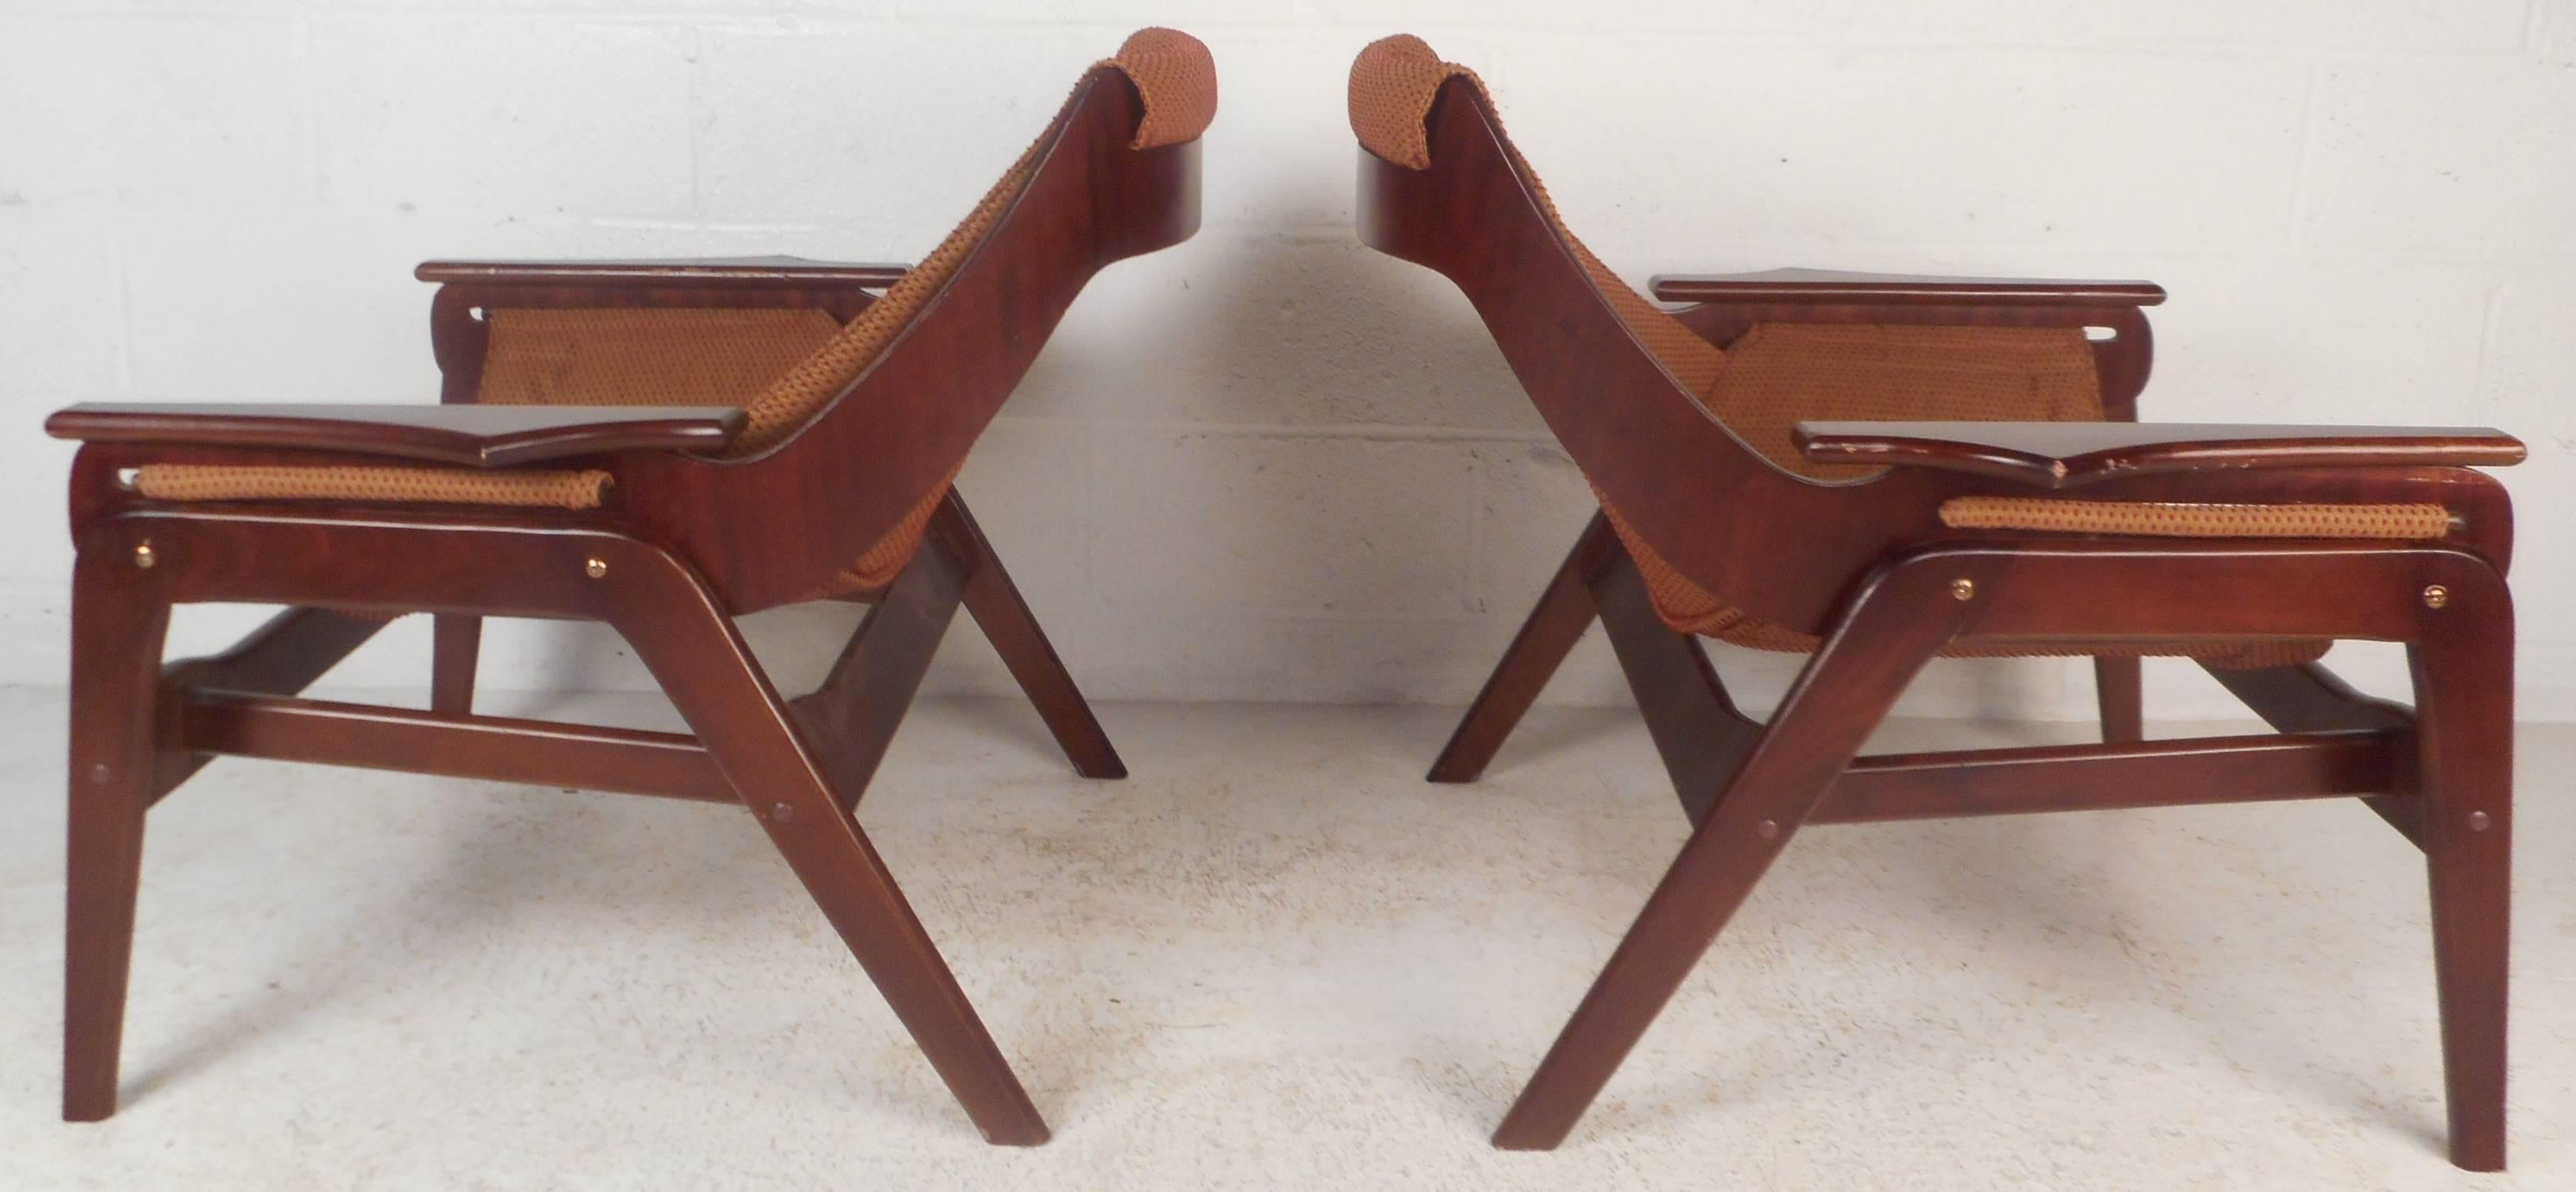 American Mid-Century Modern Sling Lounge Chairs by Jerry Johnson